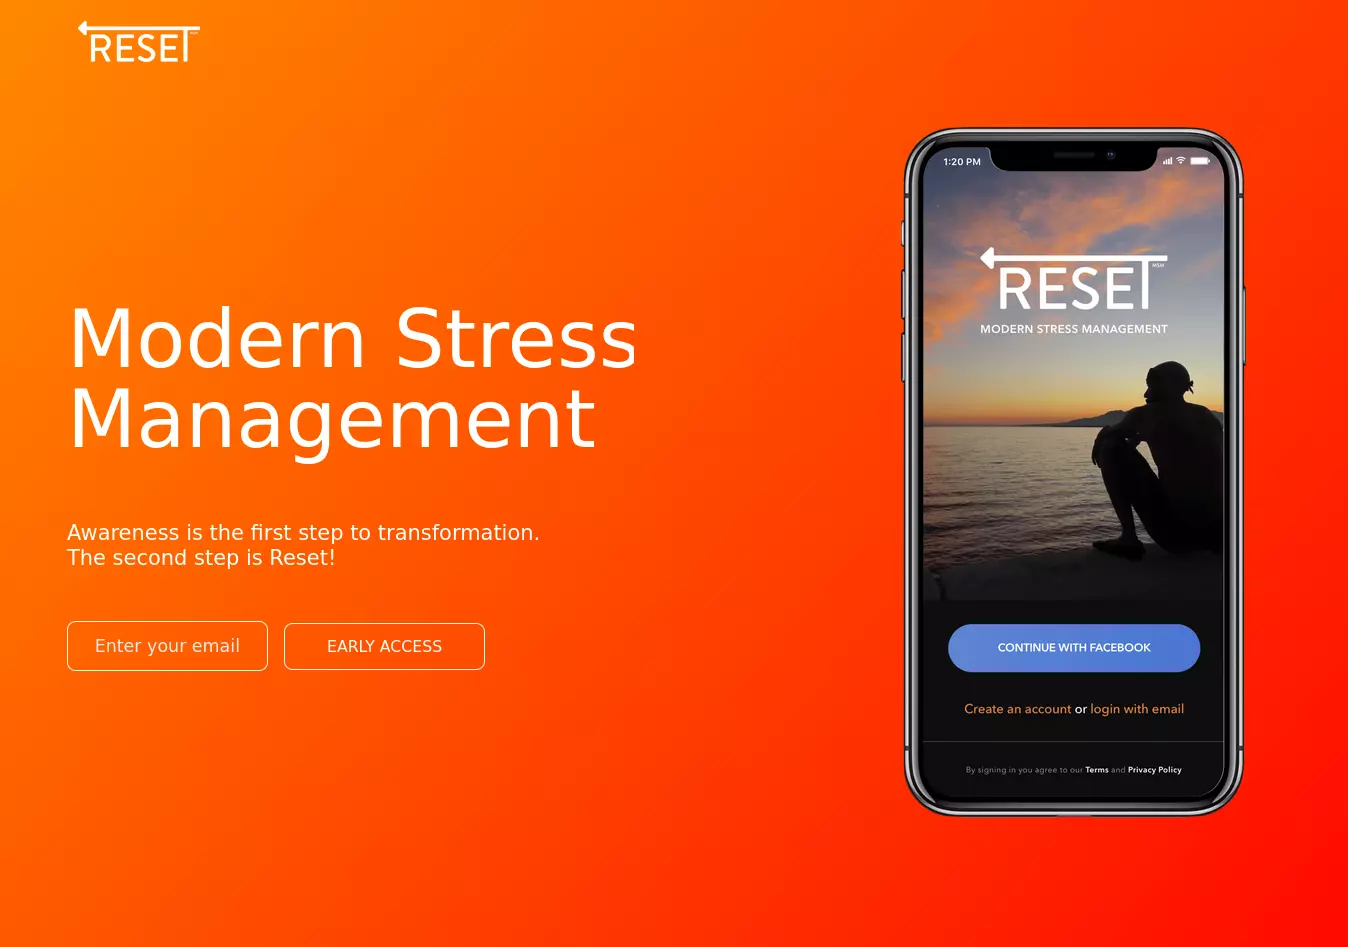 A freelance project for an e-commerce platform for people to book instructors for yoga and personal wellness. Complete with a login and payment system.